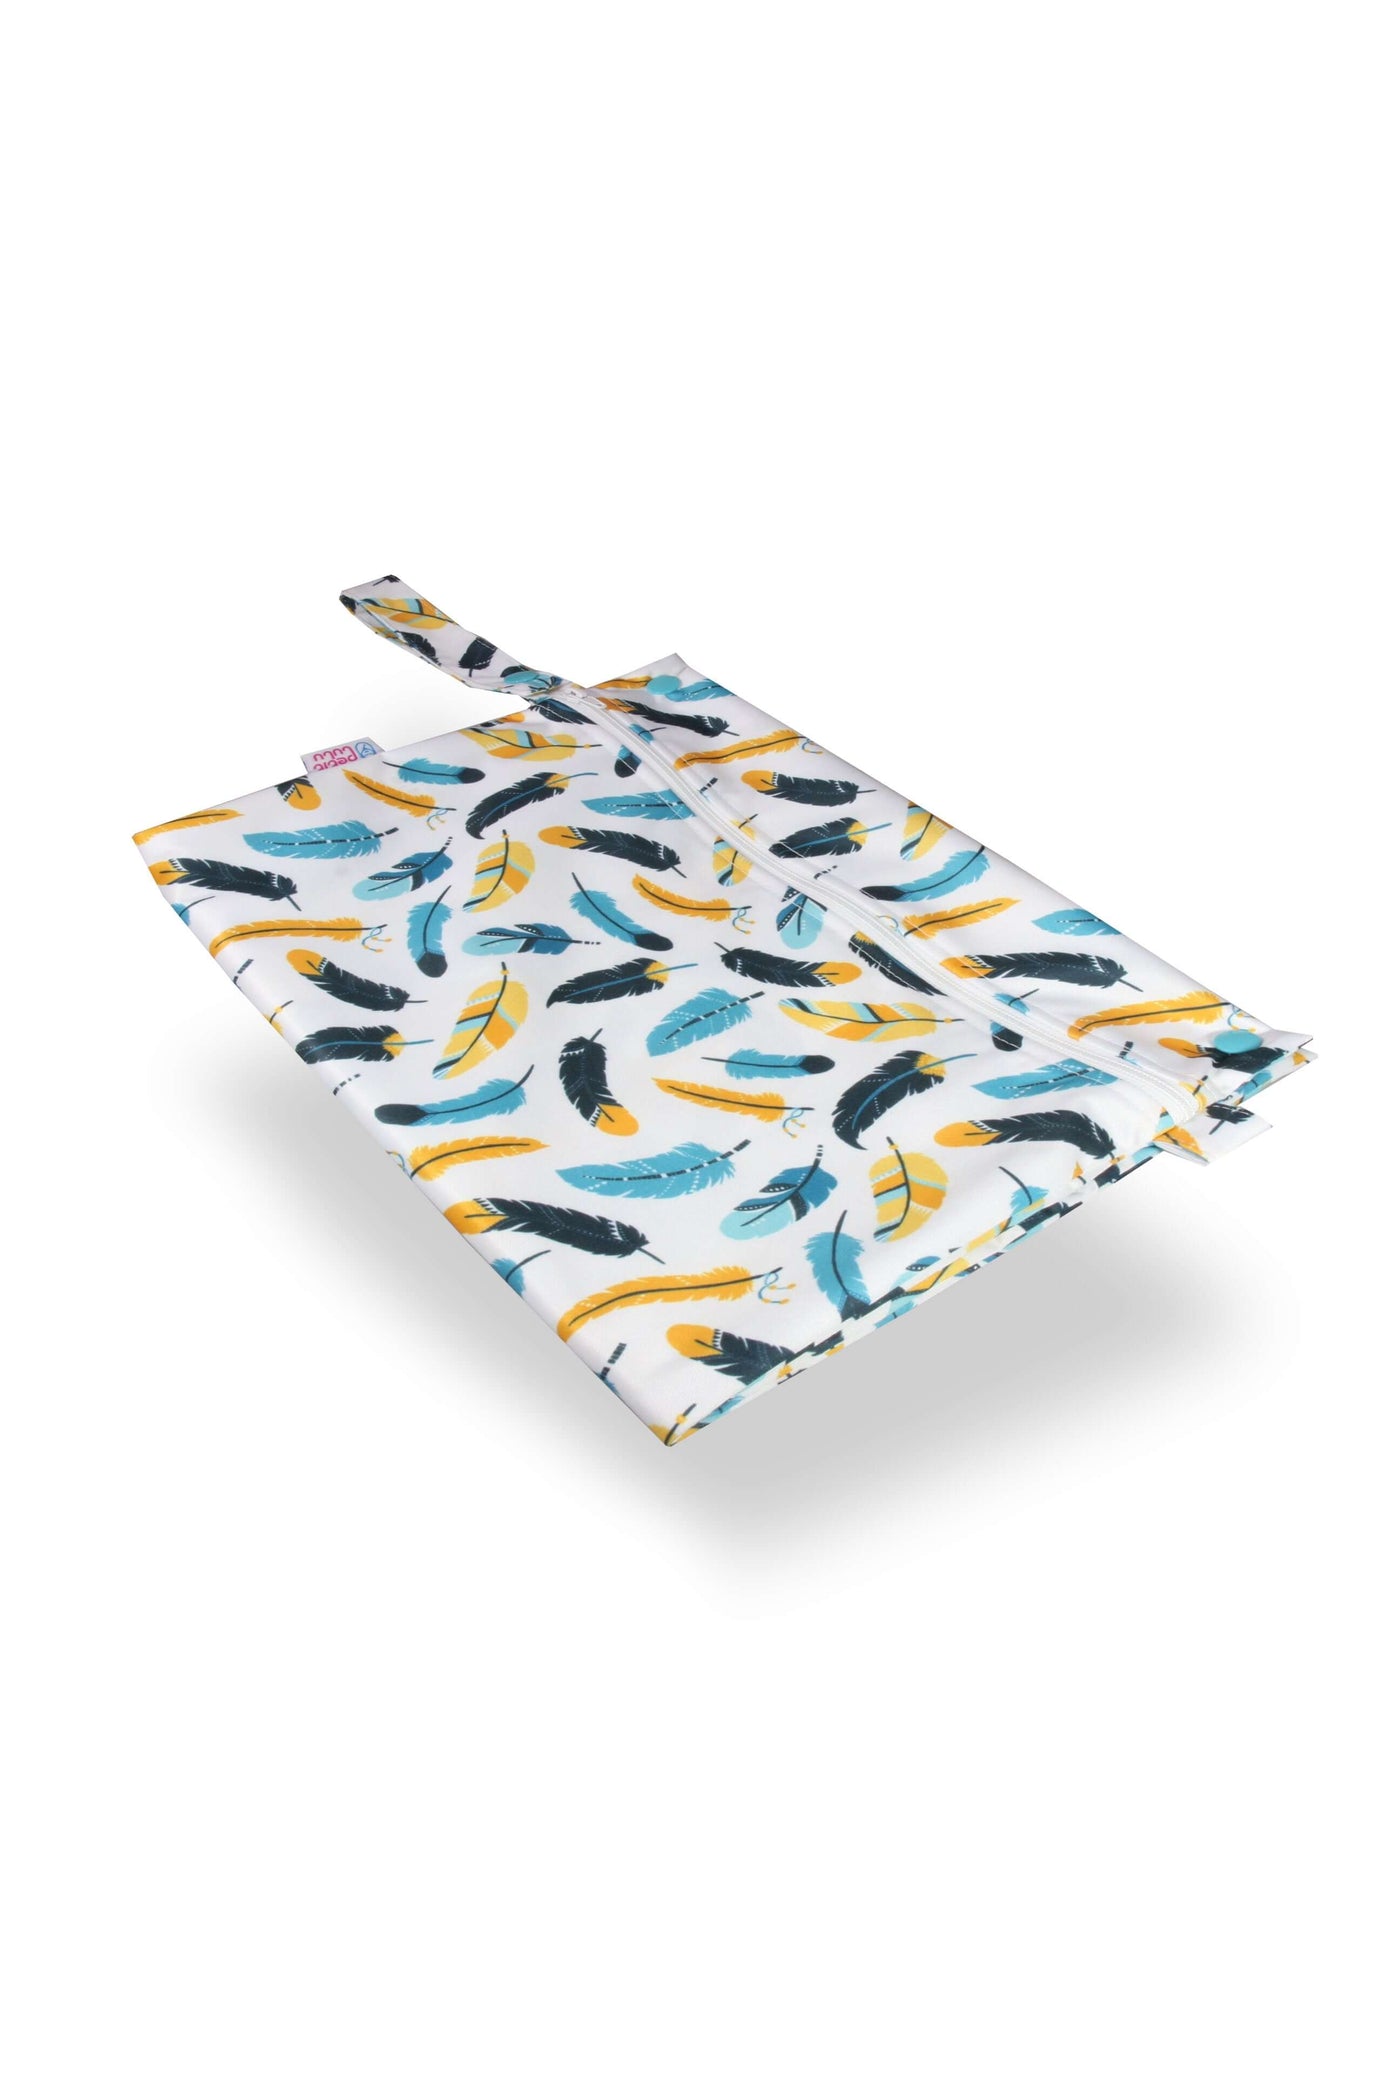 Petit Lulu Nappy Bag Colour: Turquoise Feathers reusable nappies buckets & accessories Earthlets